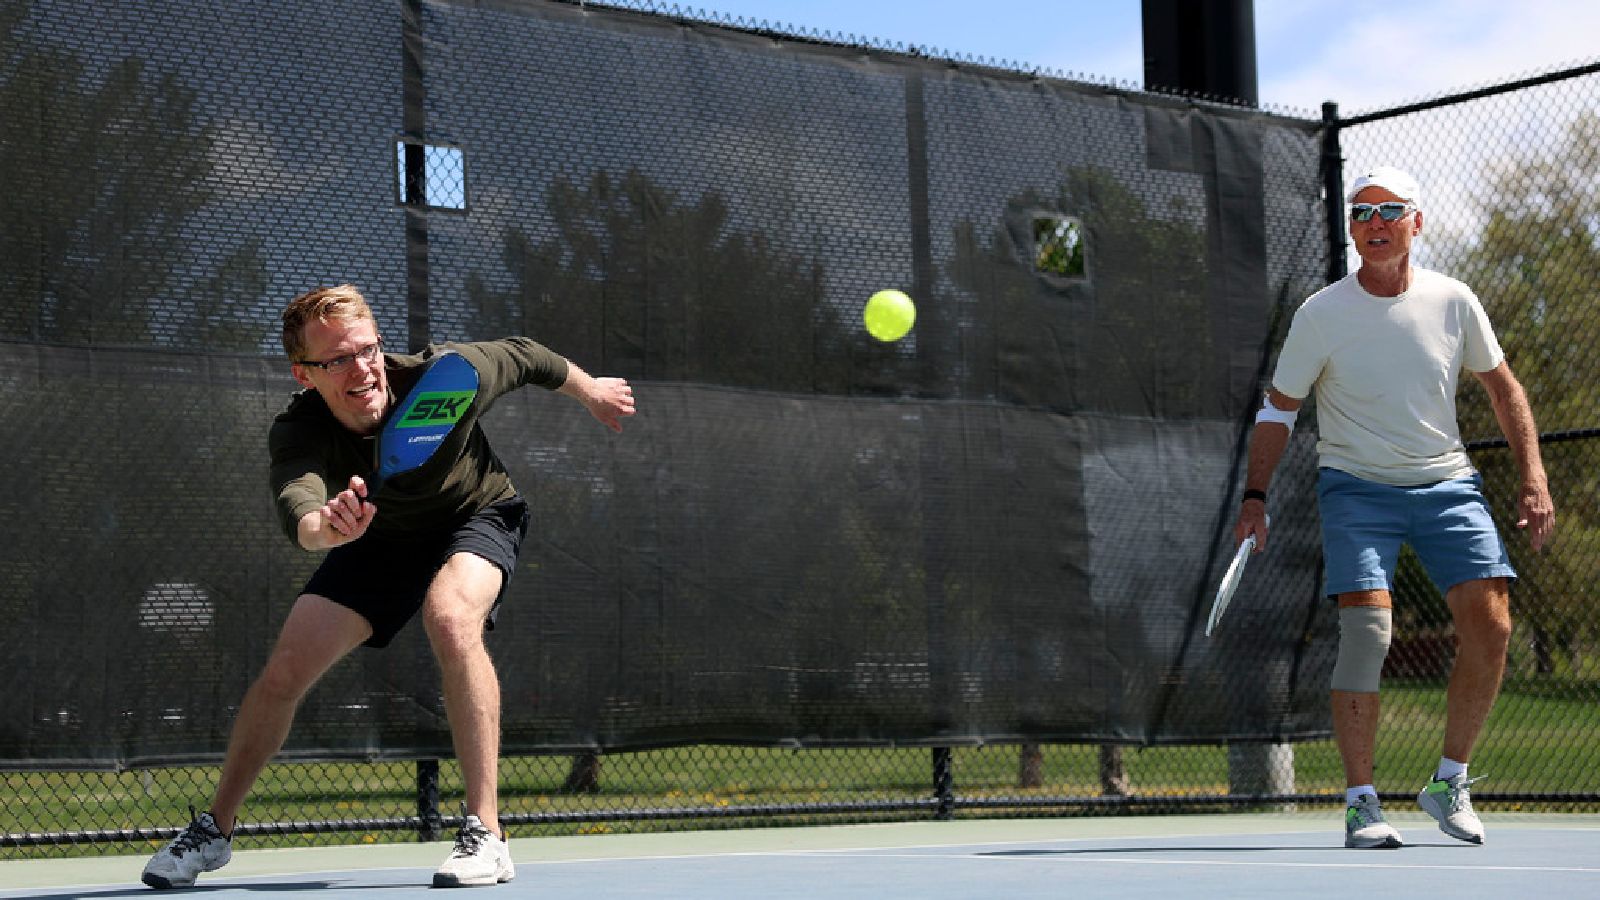 Pickleball has exploded in popularity in Utah and across the nation. Perhaps not surprisingly, so h...